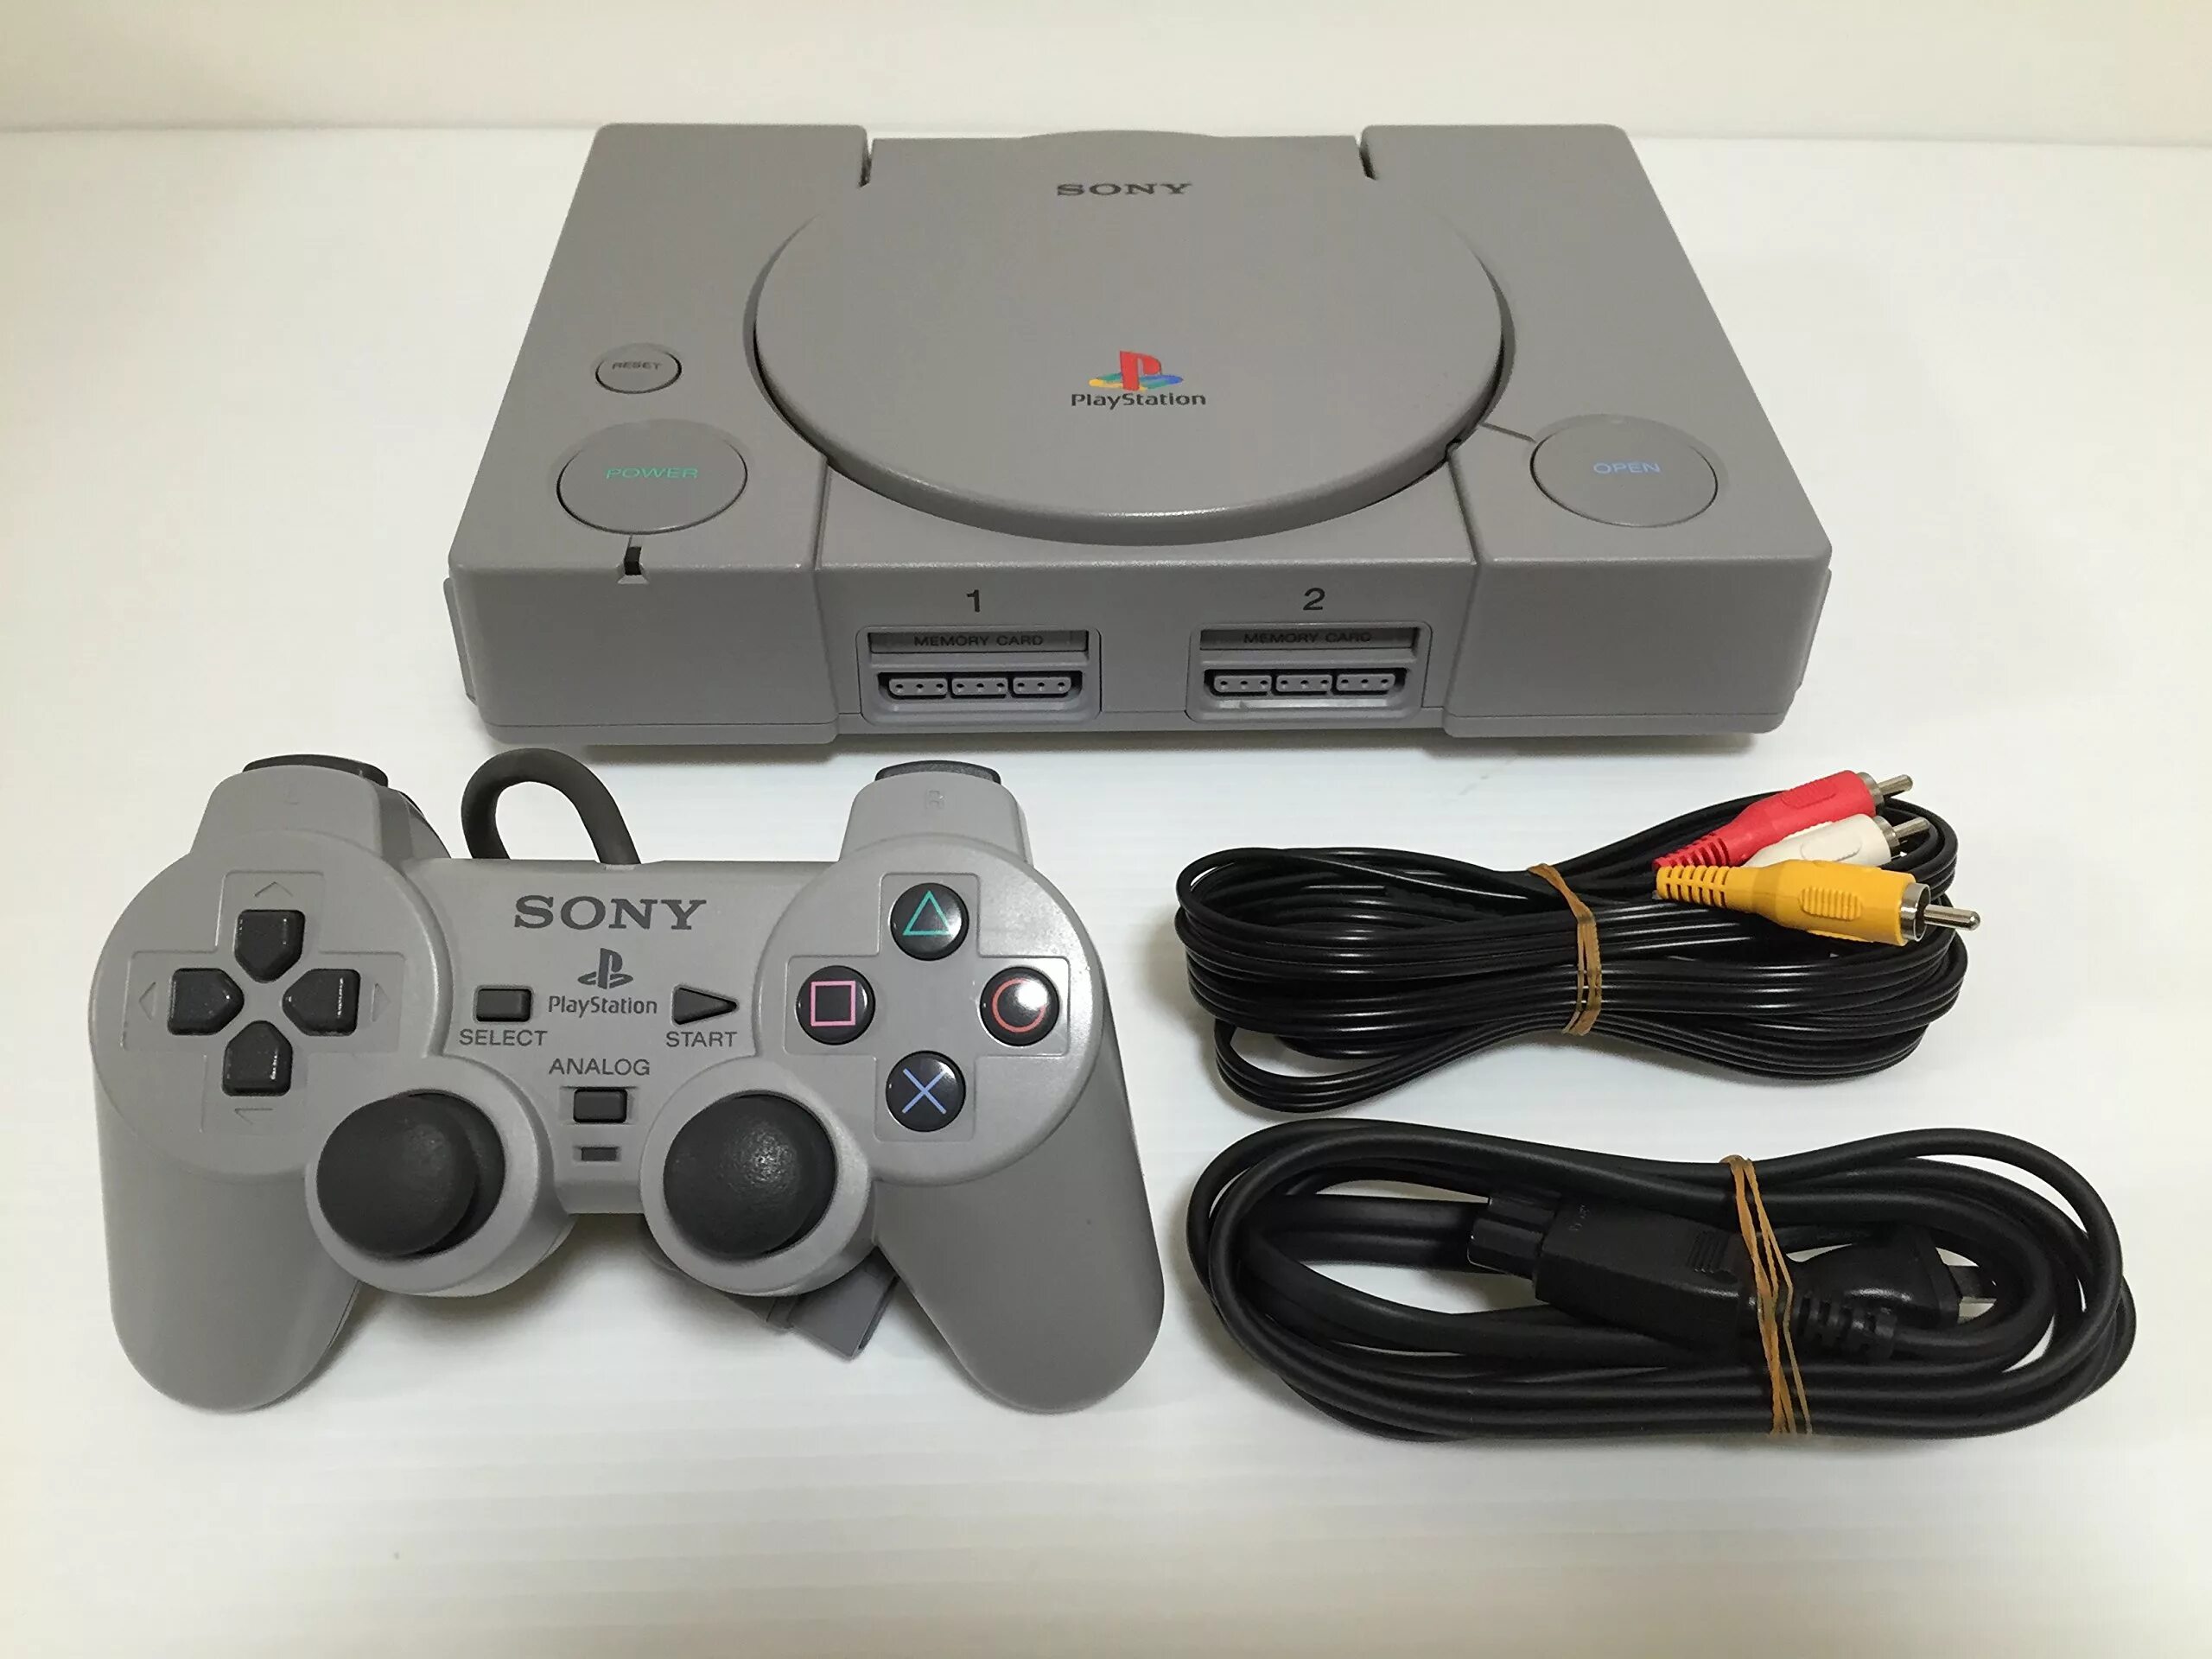 Playstation ps1. Ps1 SCPH-7000. Sony ps1. Приставка сони плейстейшен 1. Sony PLAYSTATION ps1.